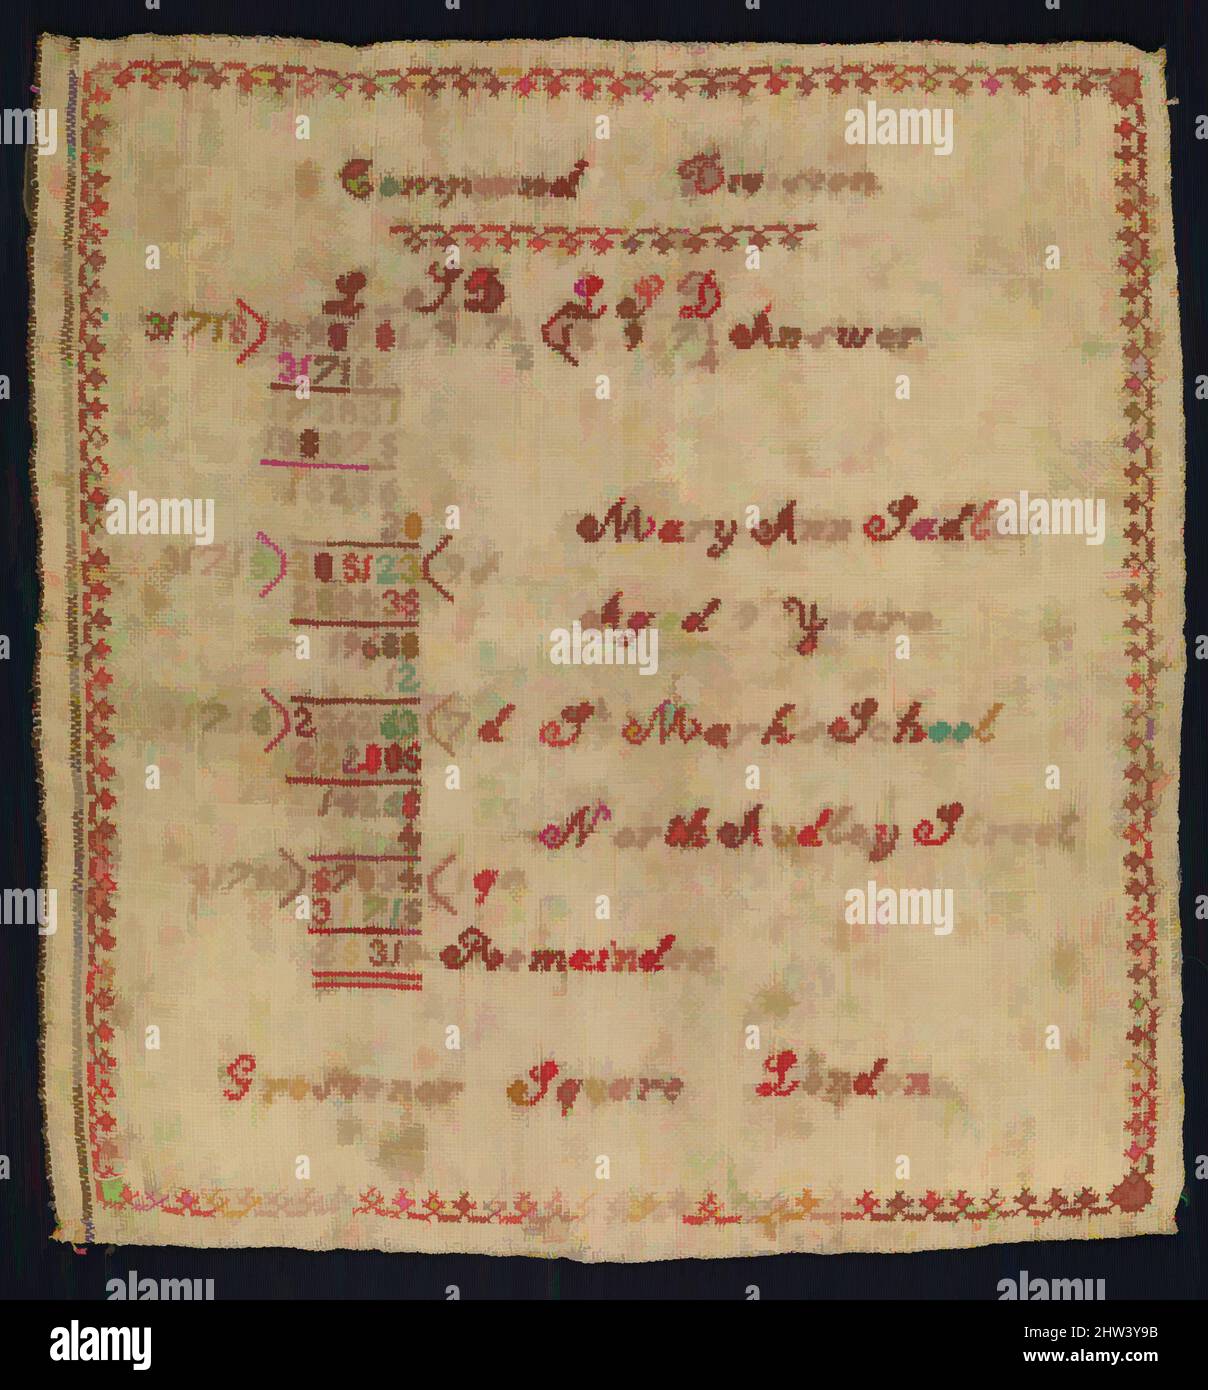 Art inspired by Sampler with compound division equation, mid-19th century, British, London, Silk embroidery on wool, H. 6 3/8 x W. 6 3/4 inches (16.2 x 17.1 cm), Textiles-Embroidered, We may never know what inspired nine-year-old Mary Ann Sadler to convert her mathematics equation into, Classic works modernized by Artotop with a splash of modernity. Shapes, color and value, eye-catching visual impact on art. Emotions through freedom of artworks in a contemporary way. A timeless message pursuing a wildly creative new direction. Artists turning to the digital medium and creating the Artotop NFT Stock Photo